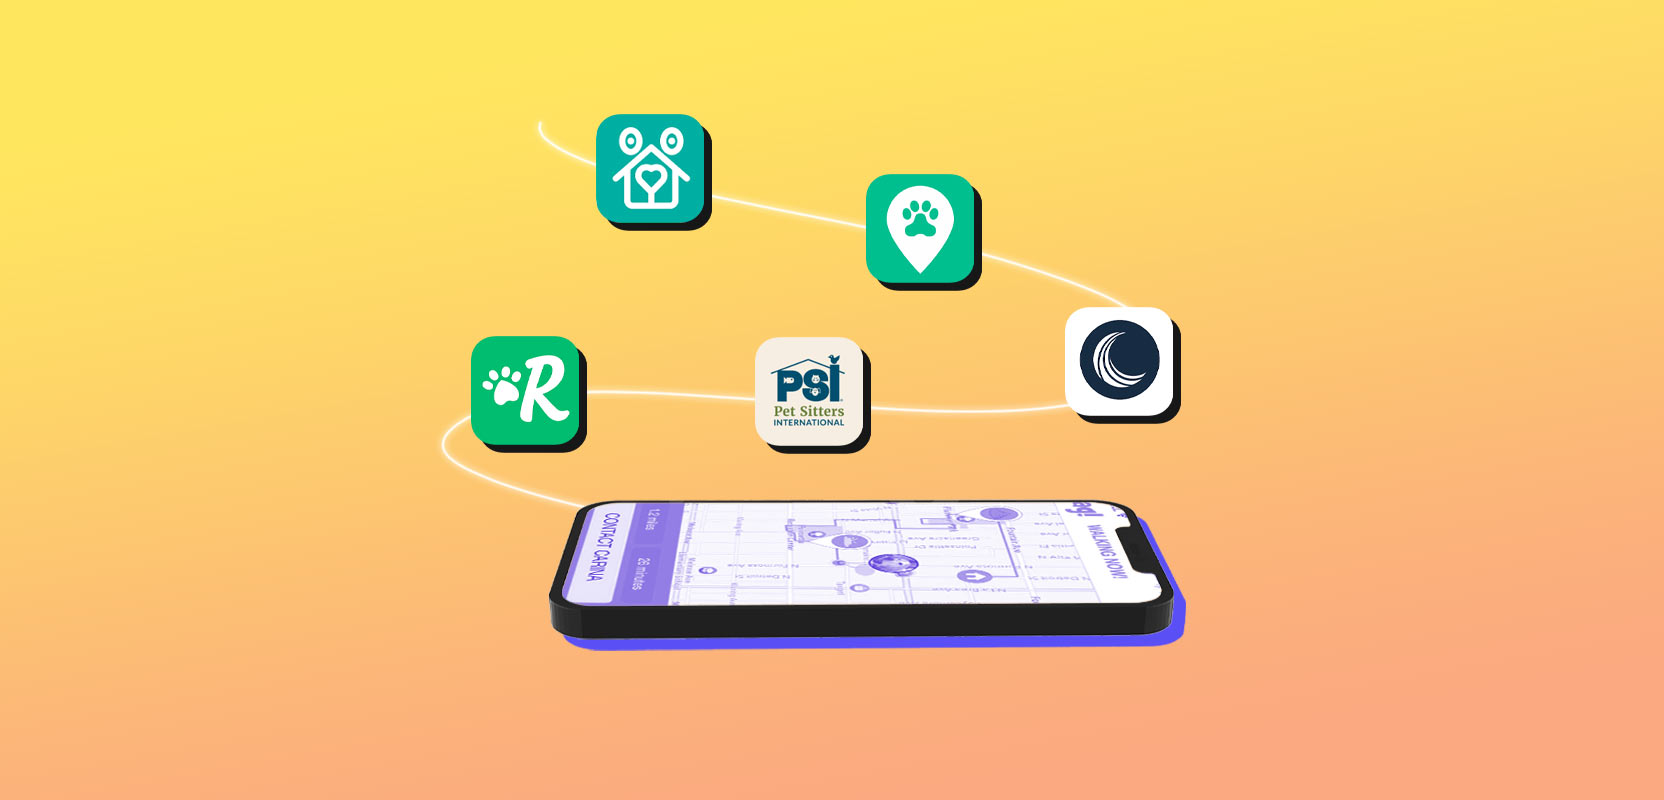 Smartphone surrounded by the logos of pet-sitting apps